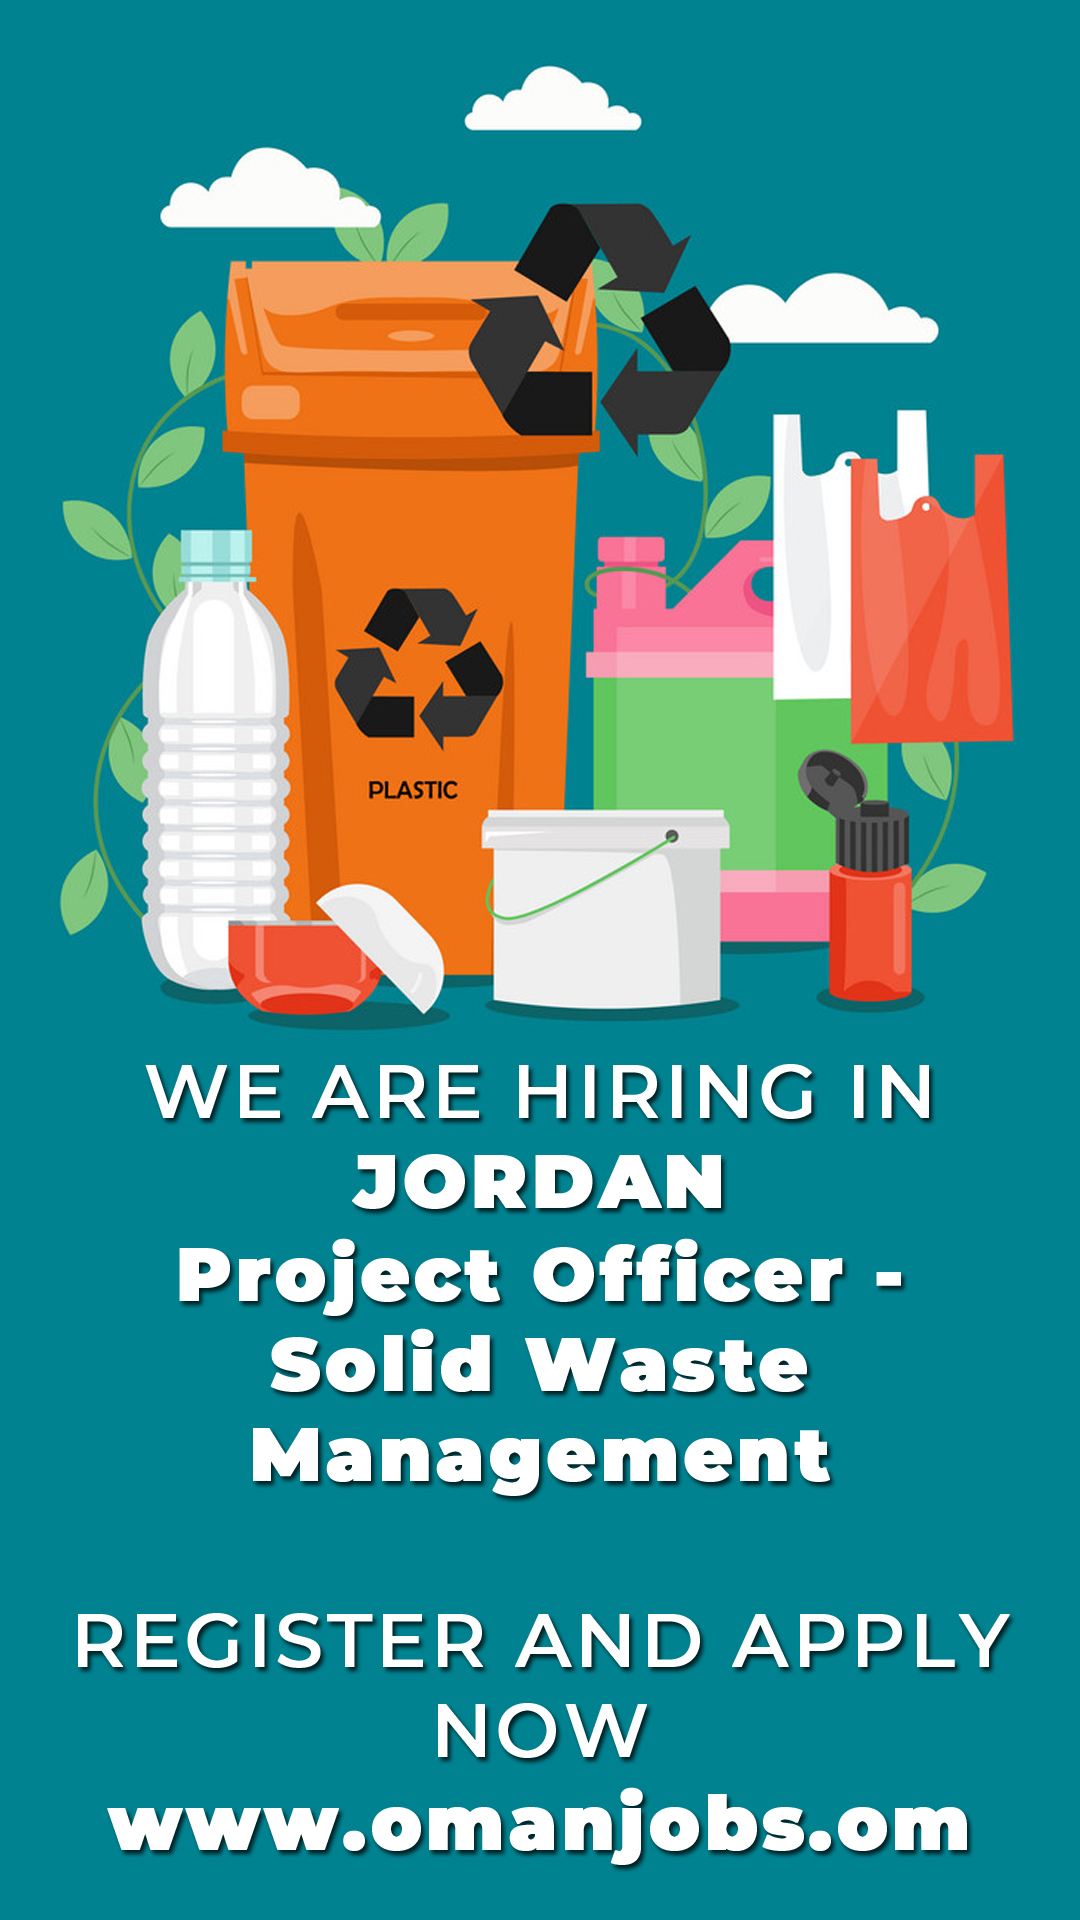 Hiring Project Officer - Solid Waste Management